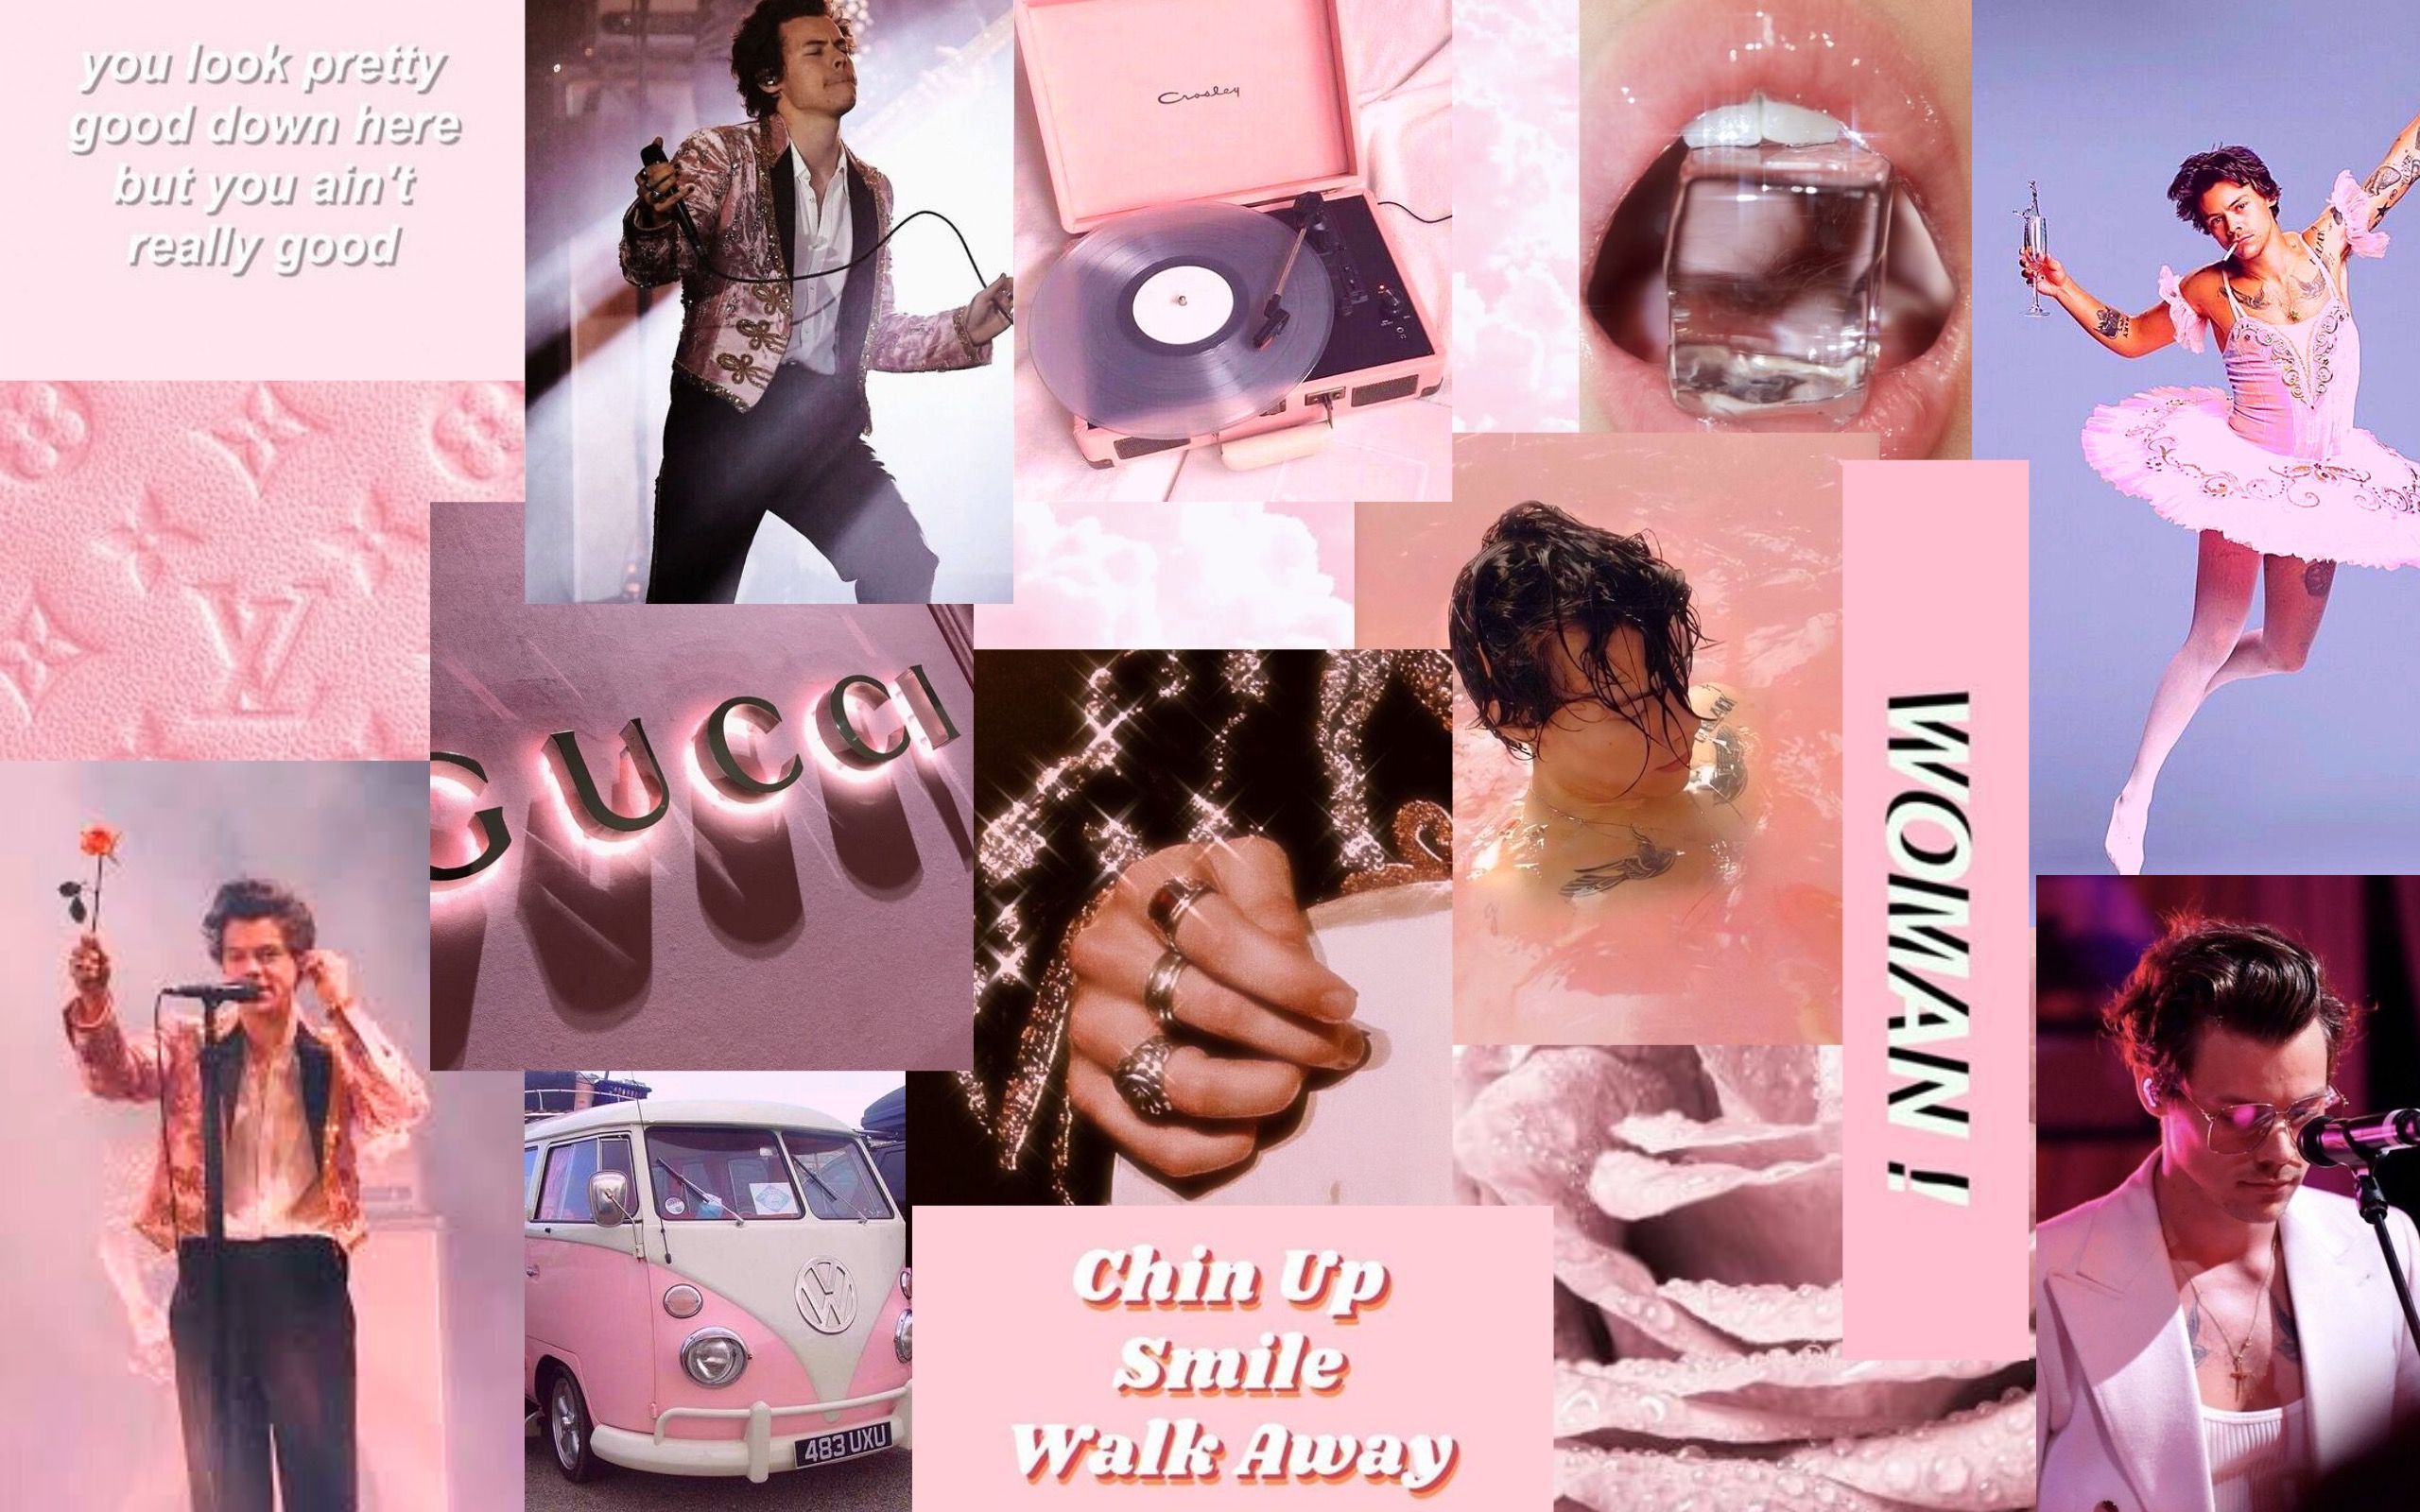 Harry Styles Aesthetic Collage Wallpaper. Harry styles aesthetic, Aesthetic collage, Mac wallpaper